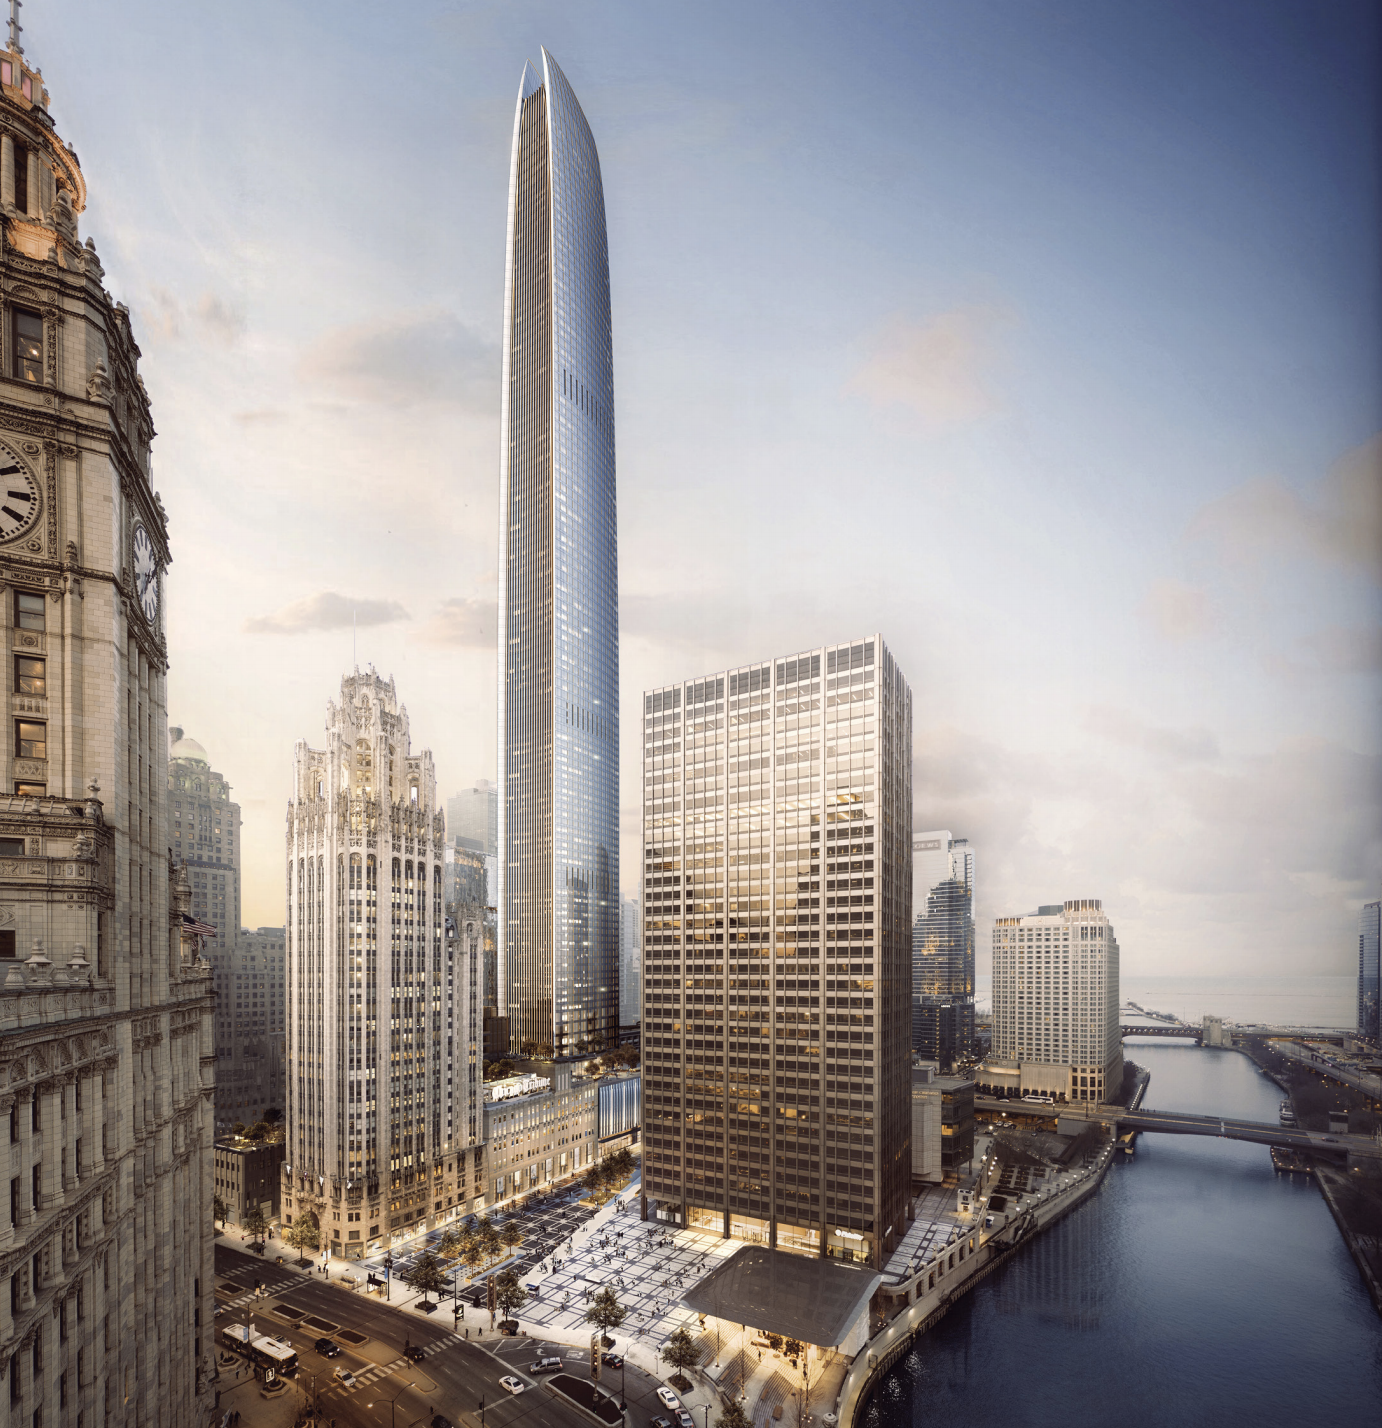 Jamaican Firm to Build Second Tallest Building in Chicago